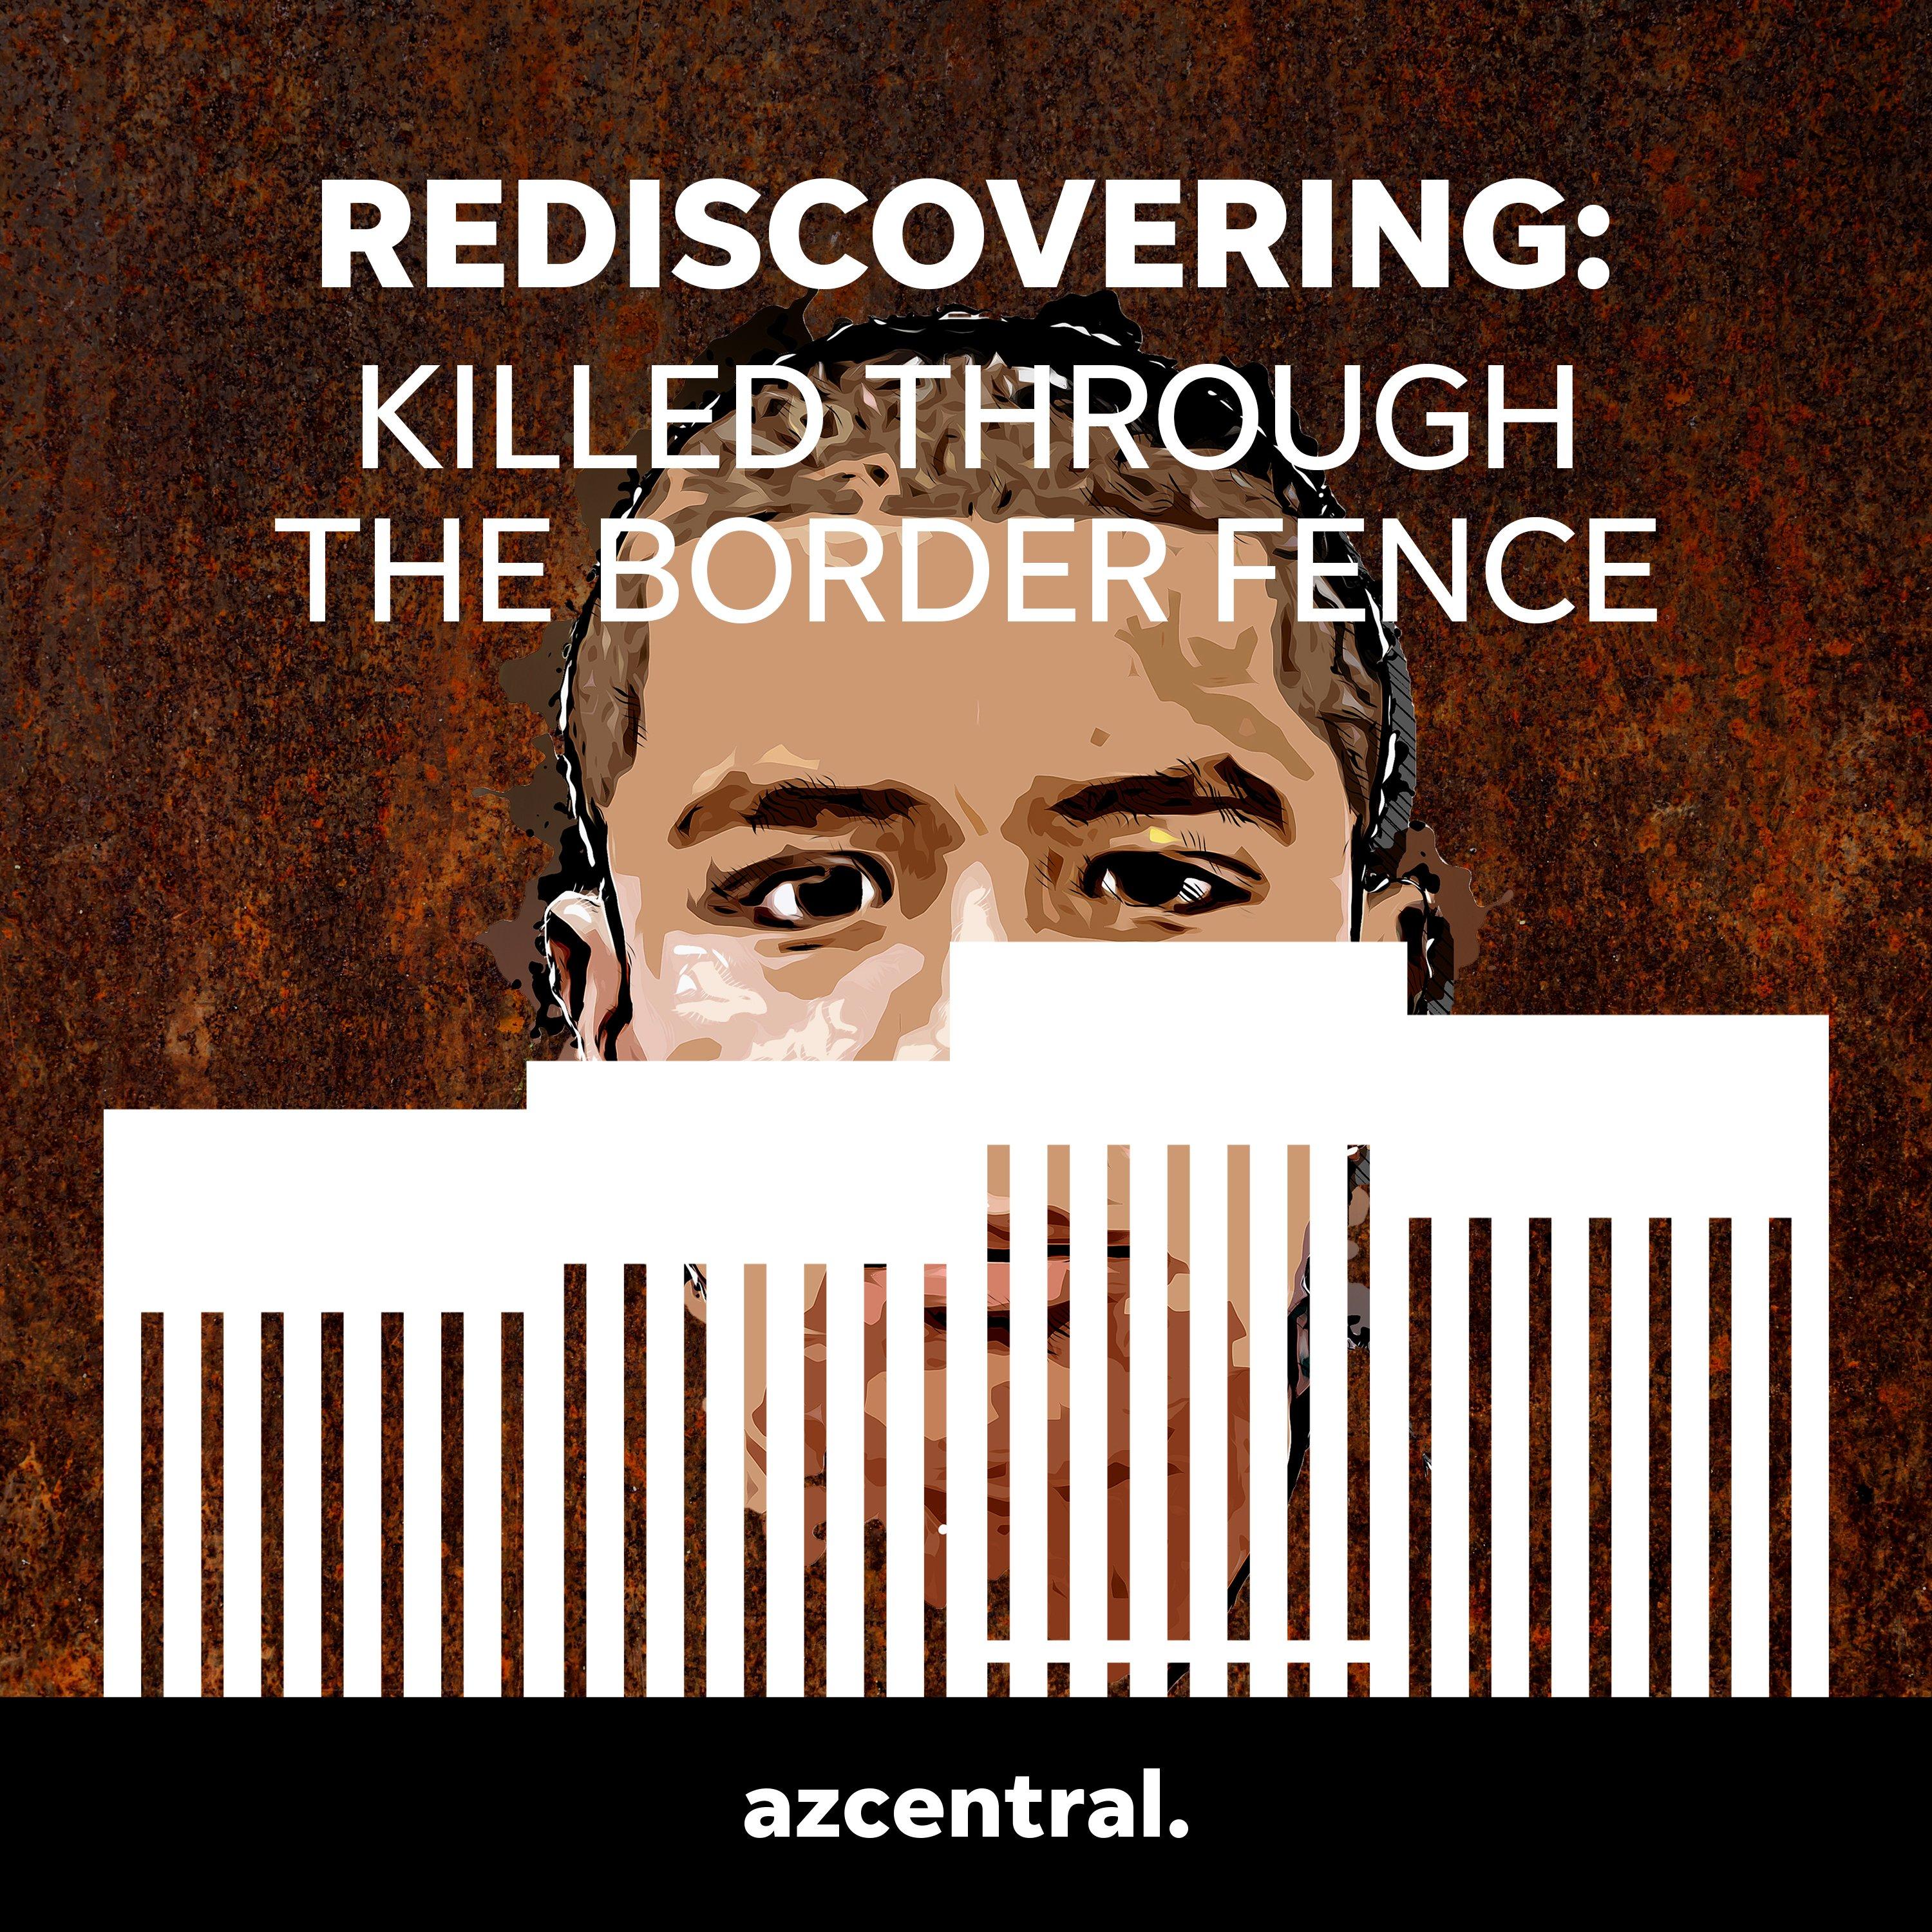 Thumbnail for "Rediscovering: Killed Through The Border Fence".